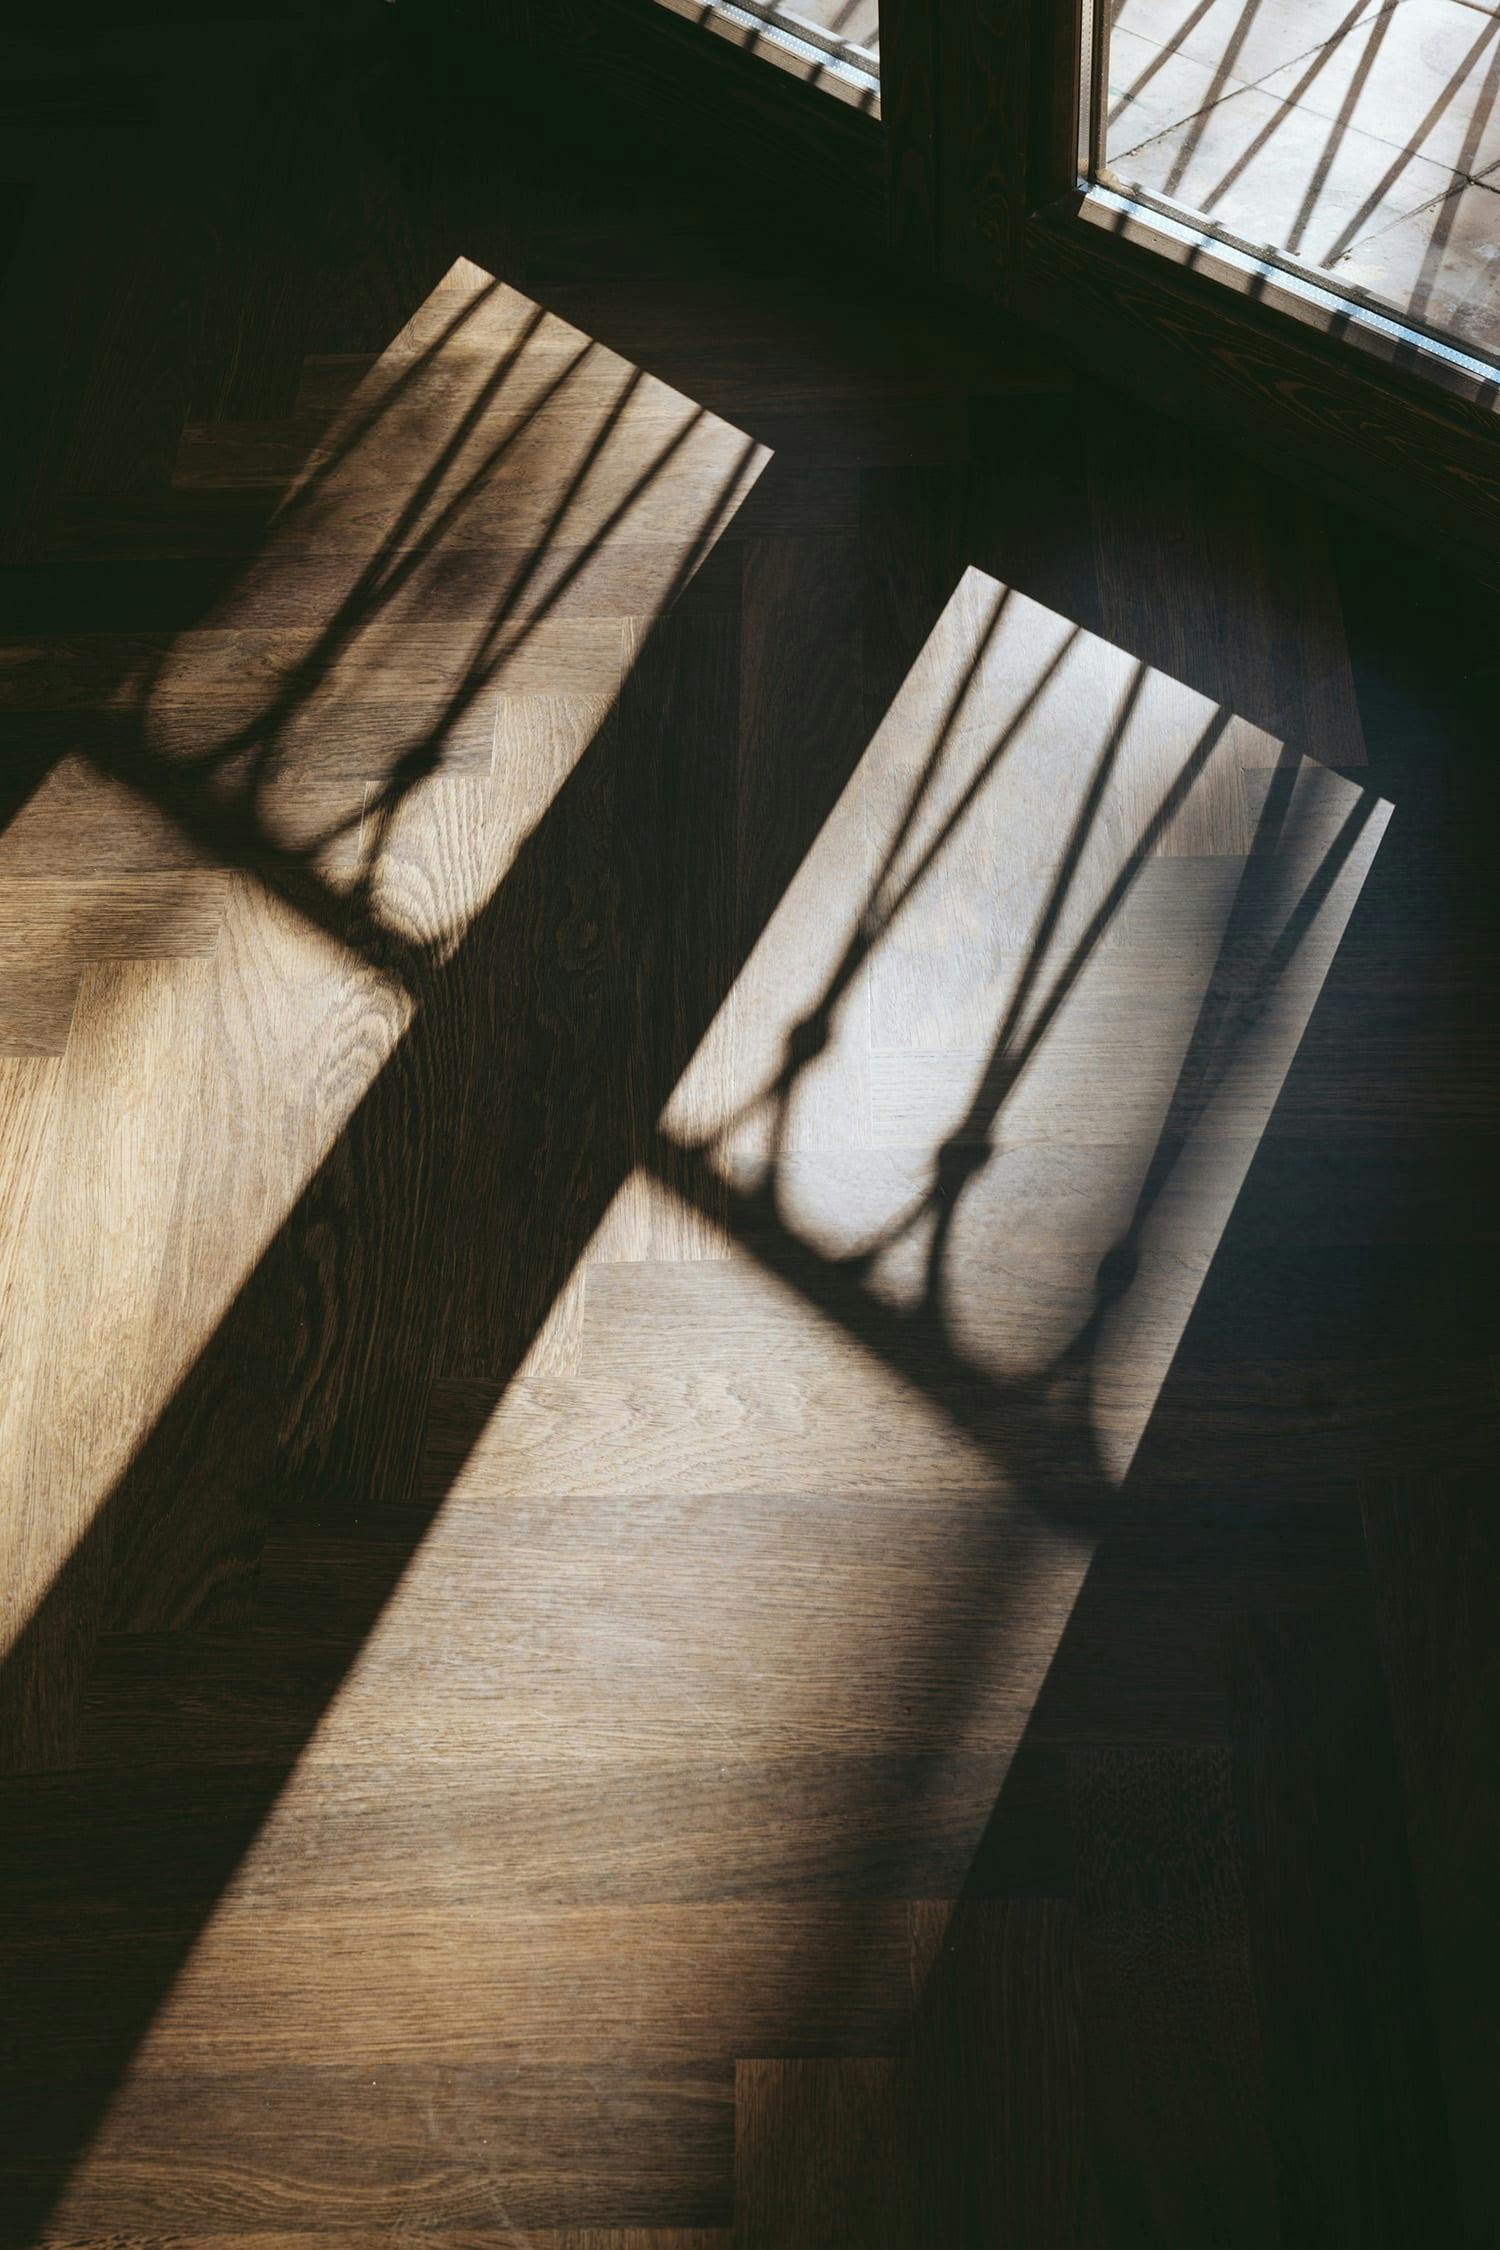 A wooden floor with a shadow cast by a window is shown in the image.